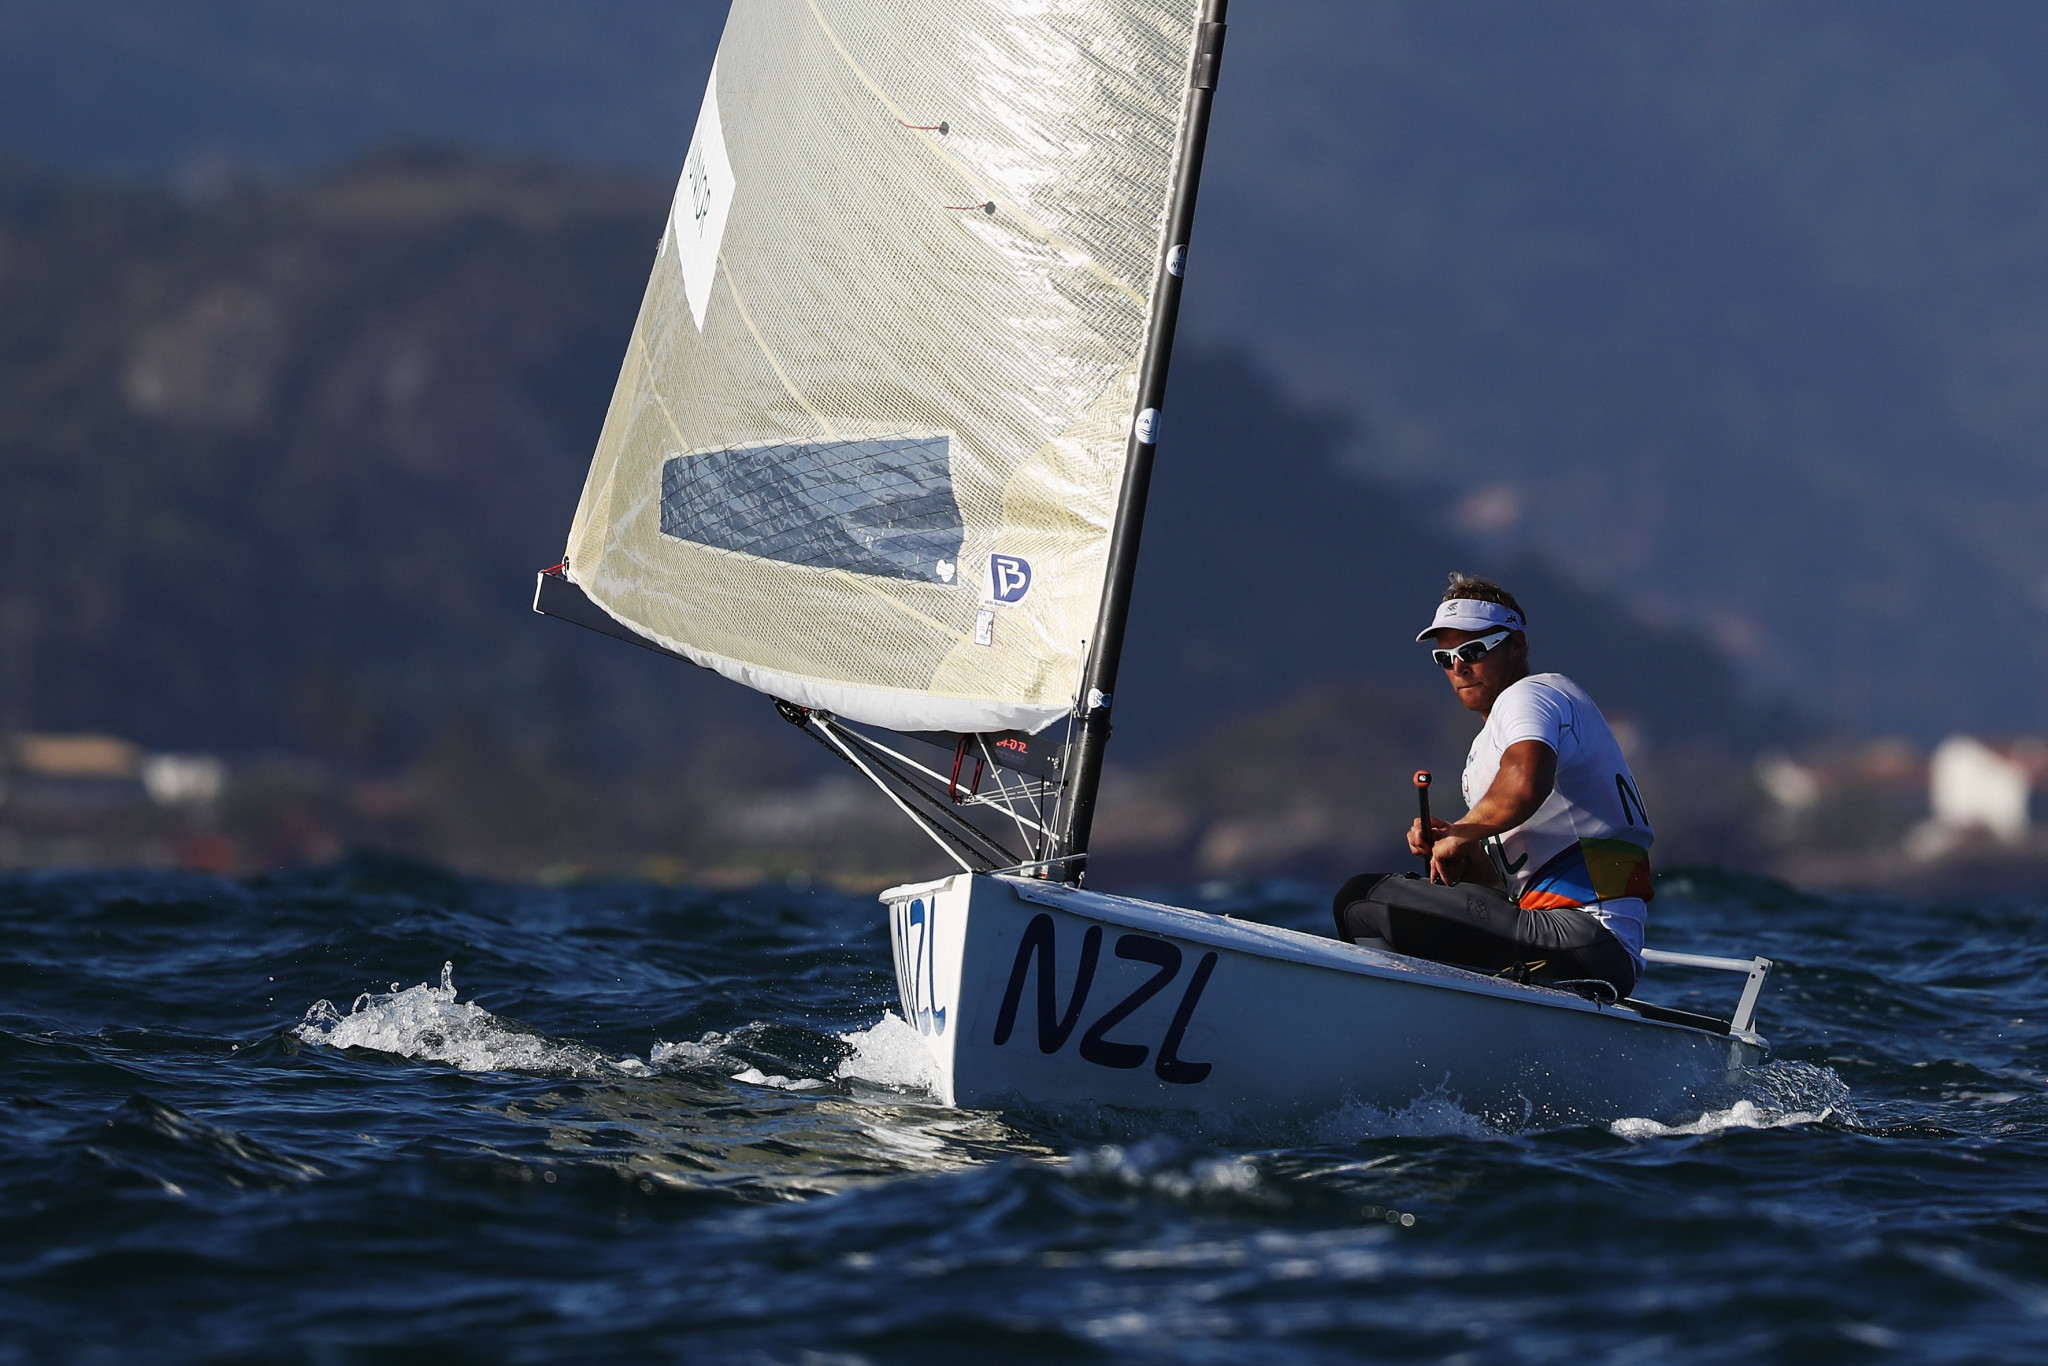 New Zealand's Junior the new leader after day two of Finn Gold Cup